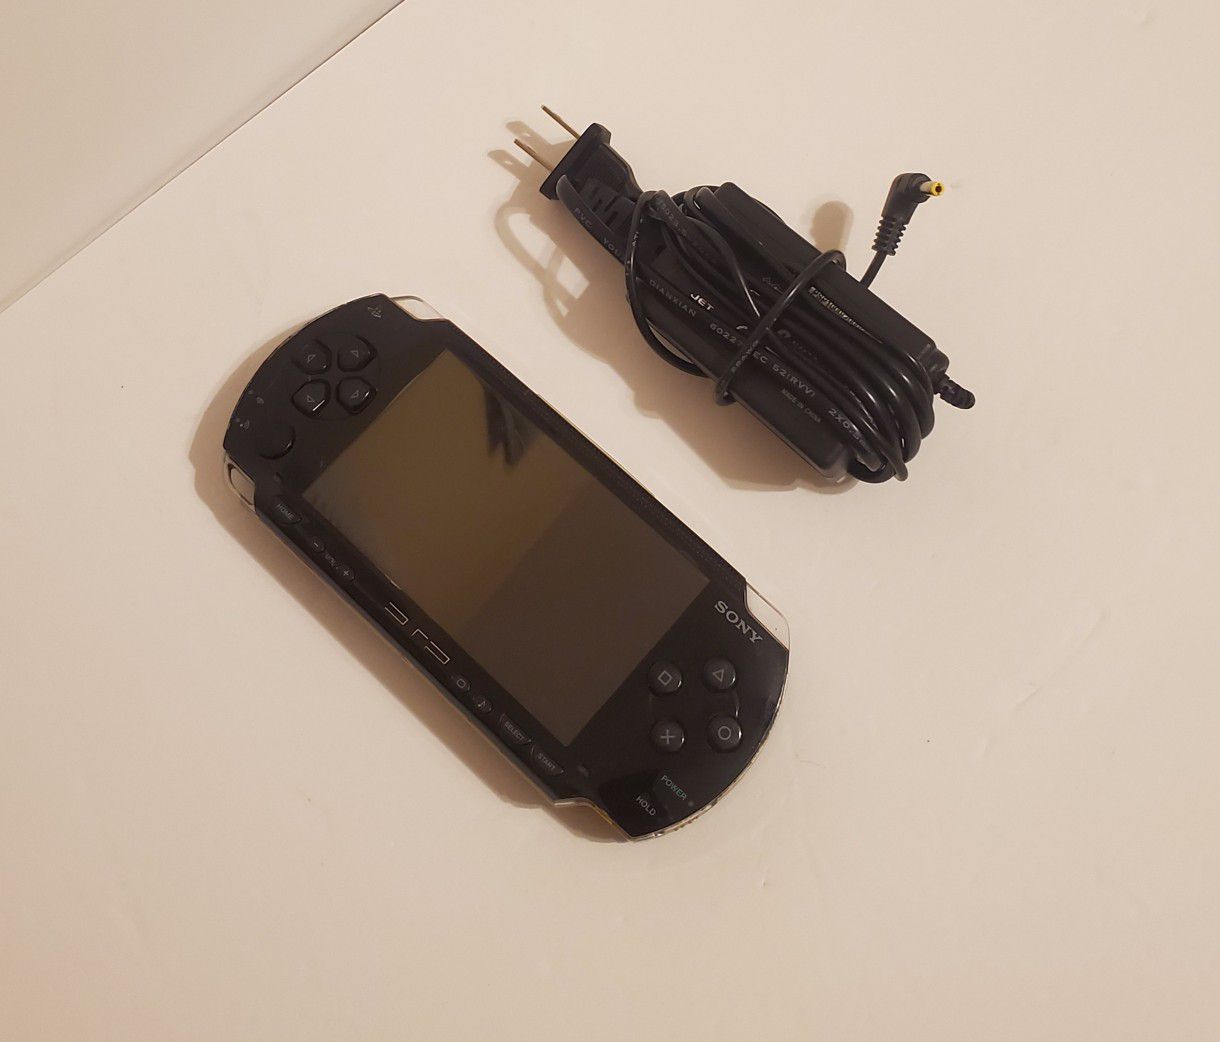 Sony PlayStation Portable PSP 1001 with charger tested